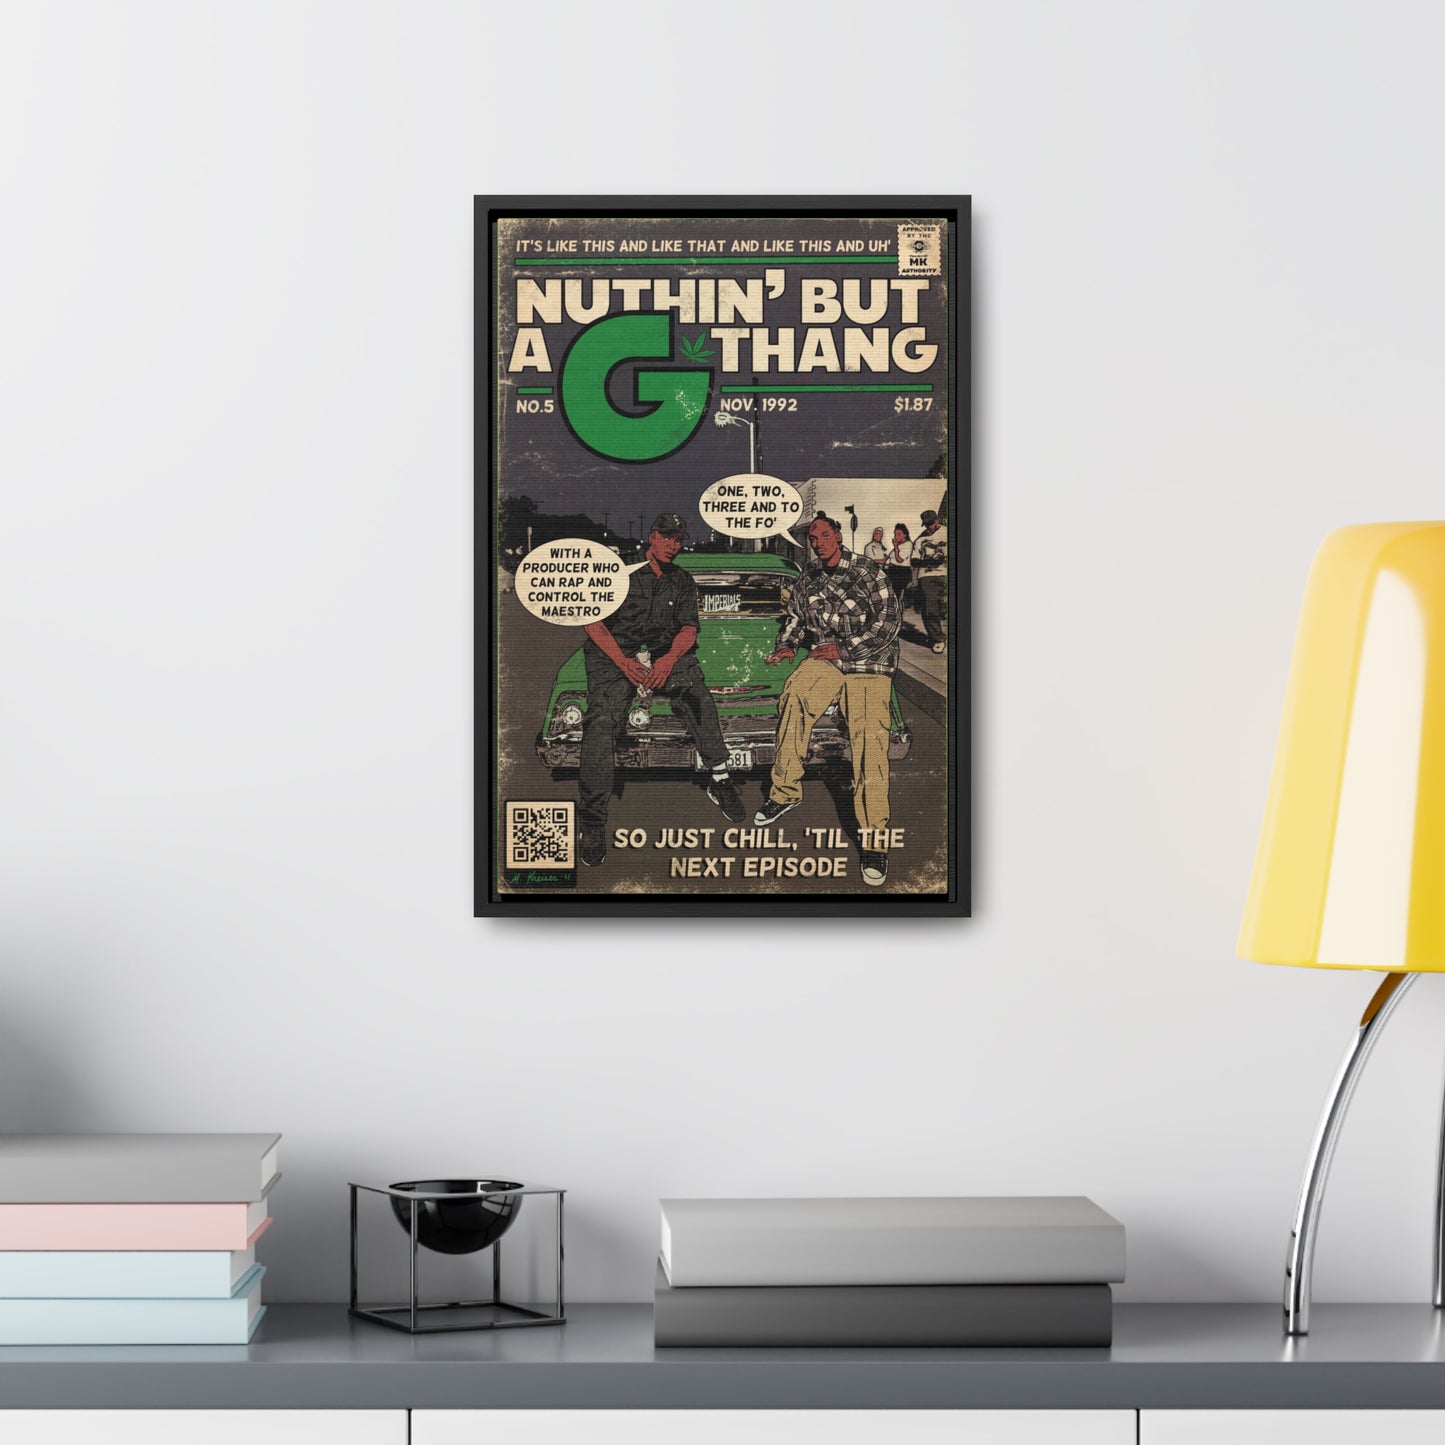 Dr. Dre & Snoop - Nuthin But A G Thang - Gallery Canvas Wraps, Vertical Frame